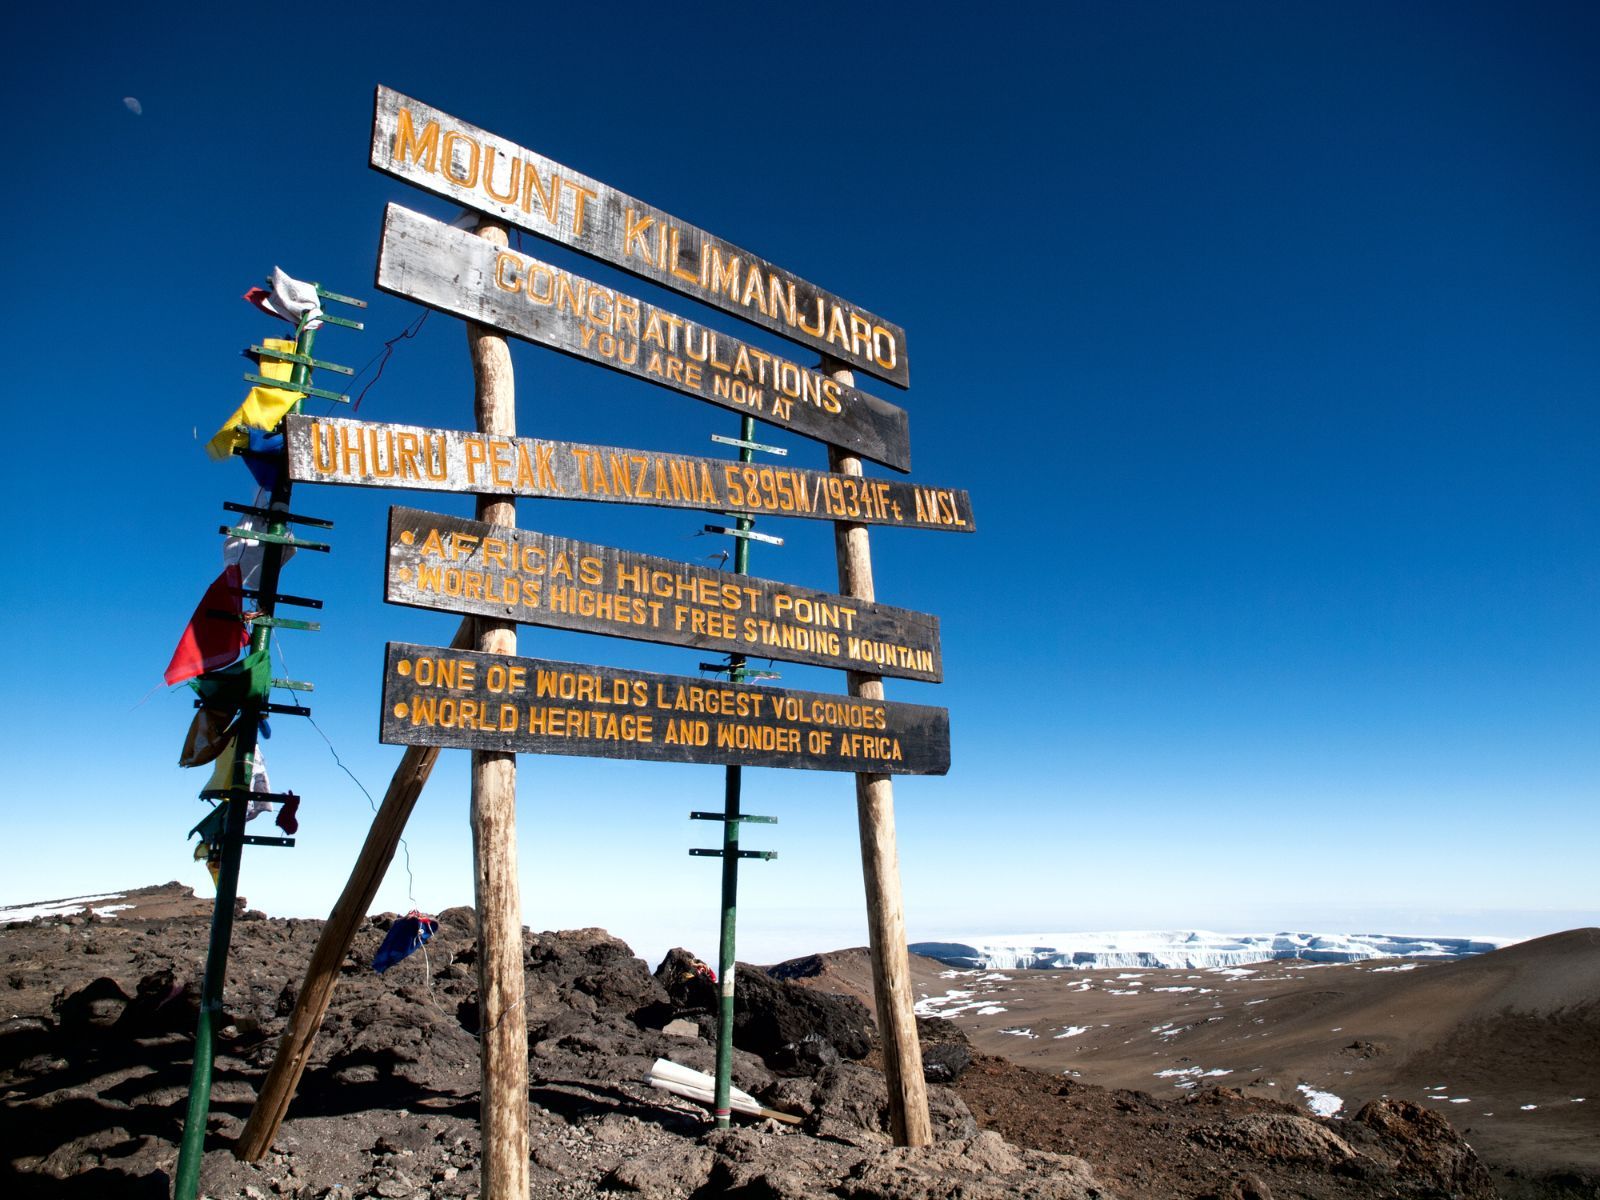 The famous Mount Kilimanjaro summit sign, which would not have been around to congratulate Sheila Macdonald. Photo: Getty